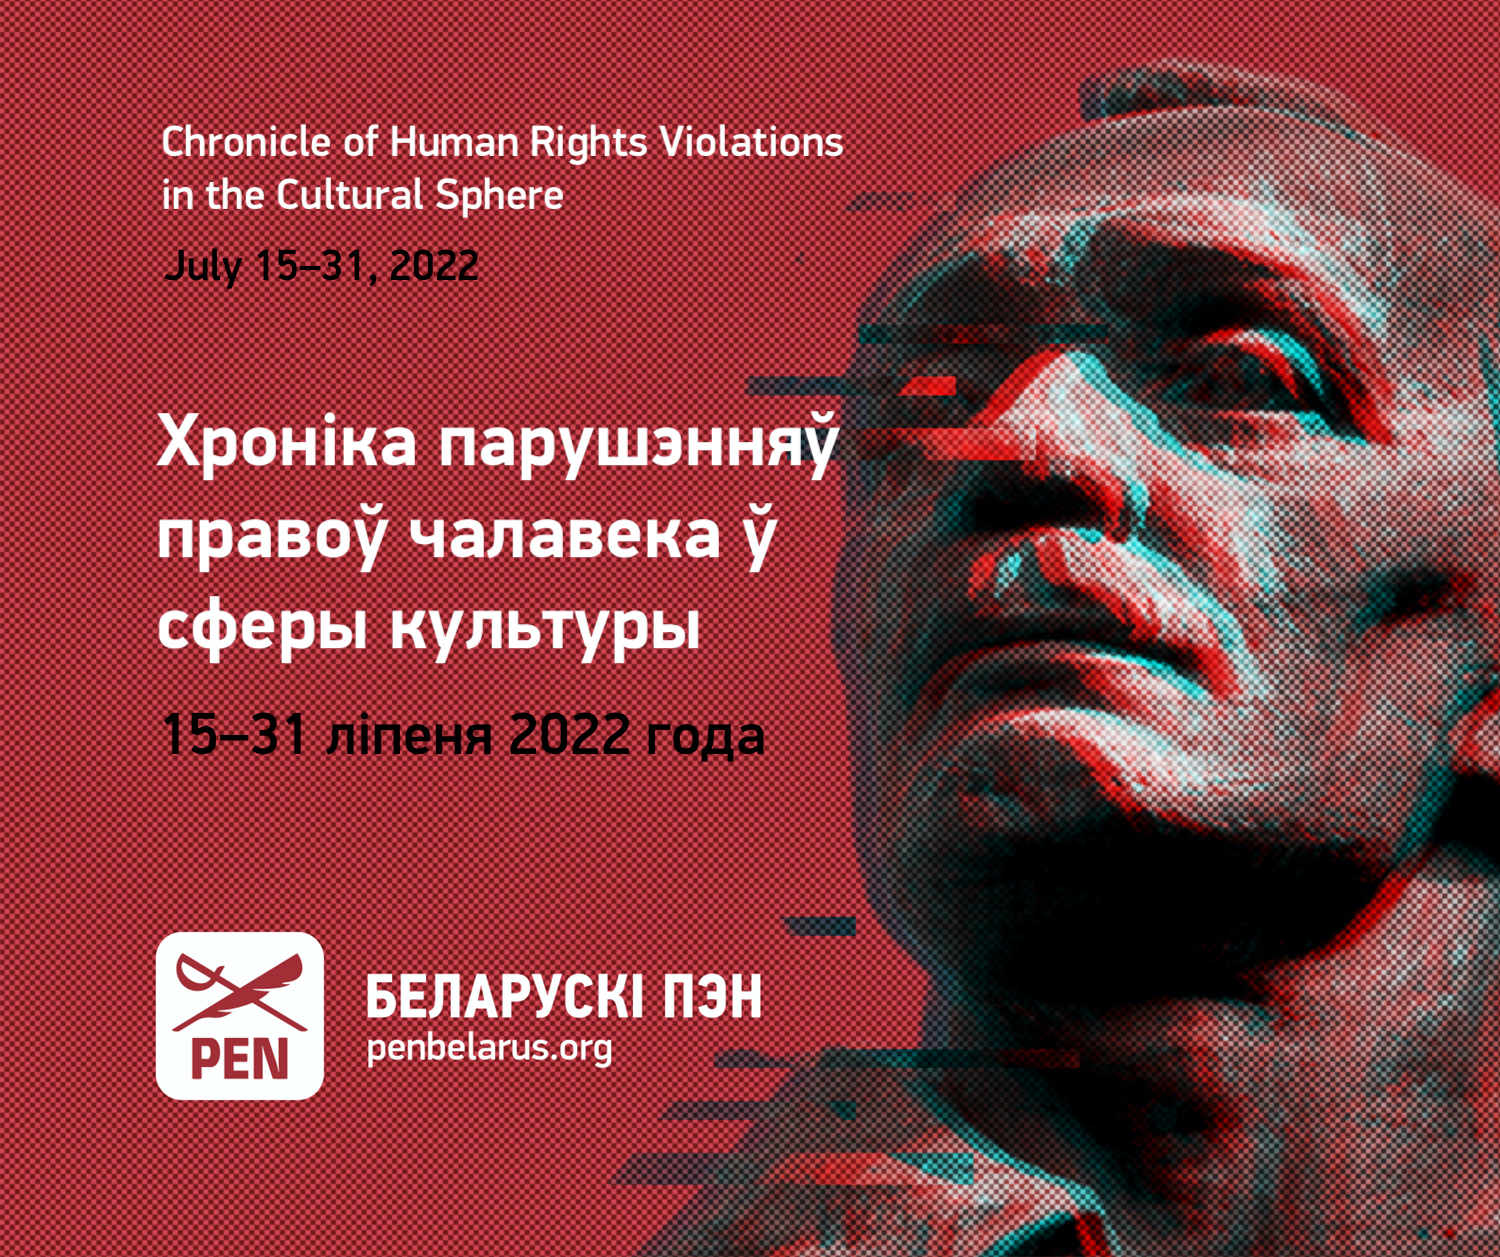 Chronicle of Human Rights Violations in the Cultural Sphere (July 15-31, 2022)